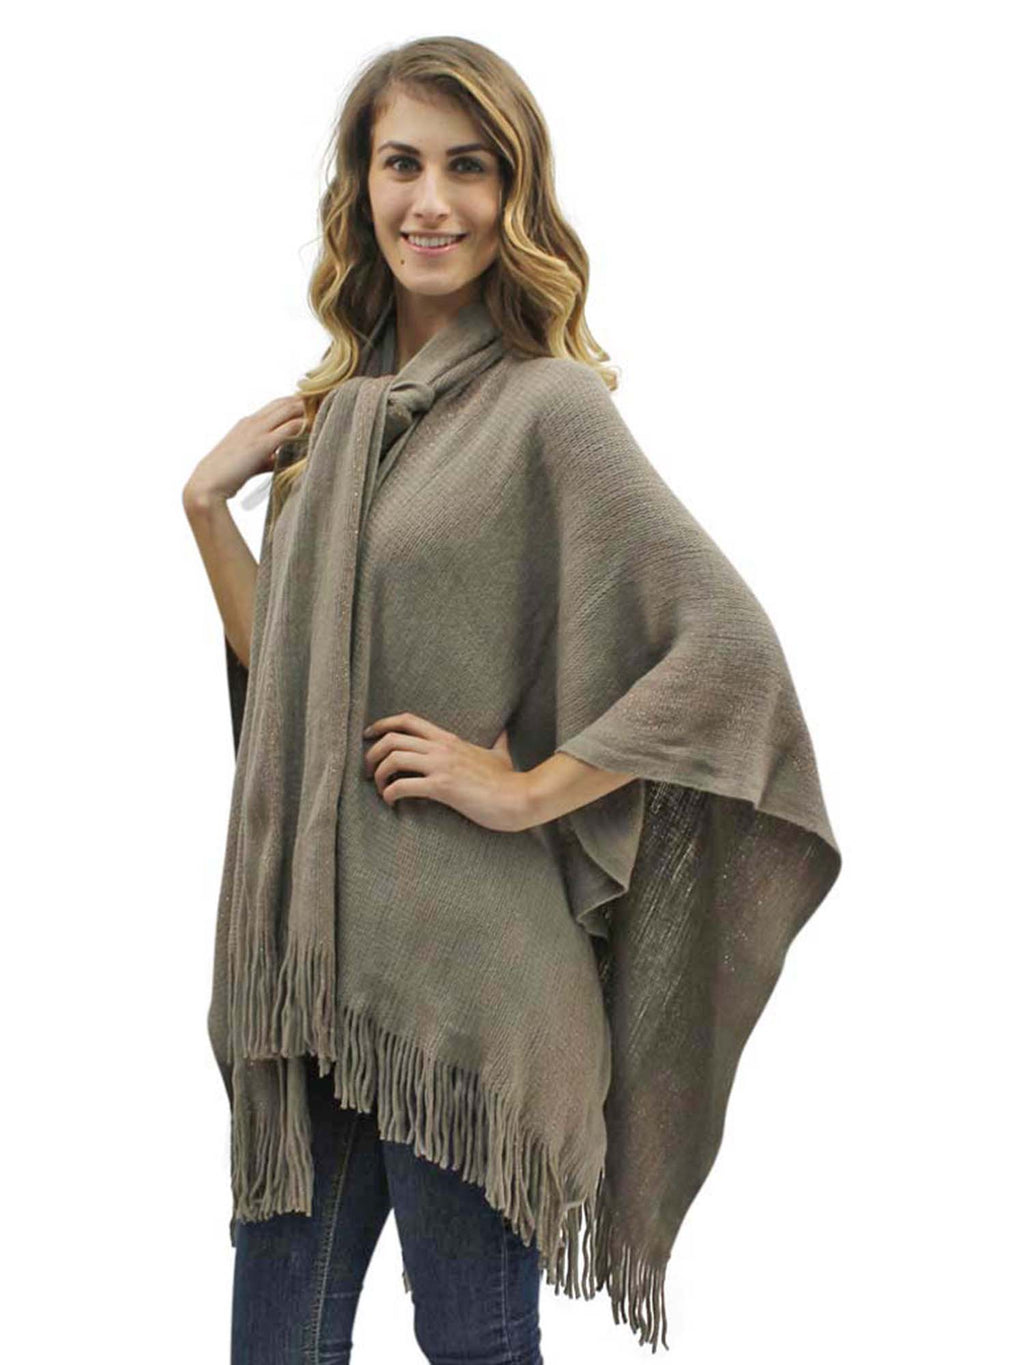 Two-Tone Fringed Shawl With Attached Scarf